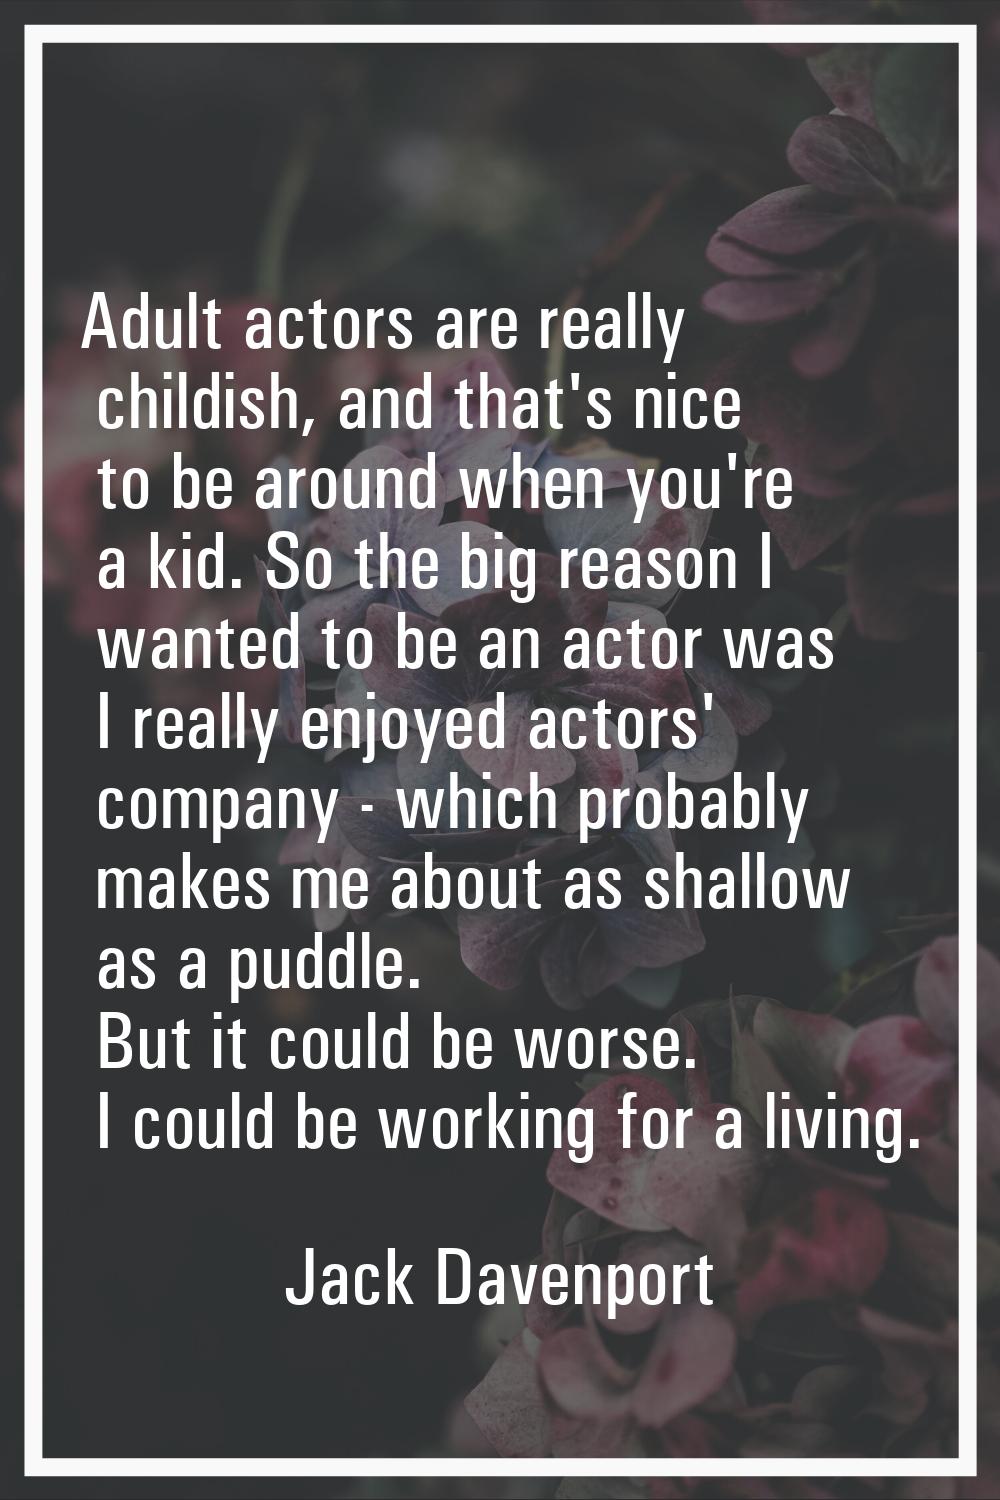 Adult actors are really childish, and that's nice to be around when you're a kid. So the big reason